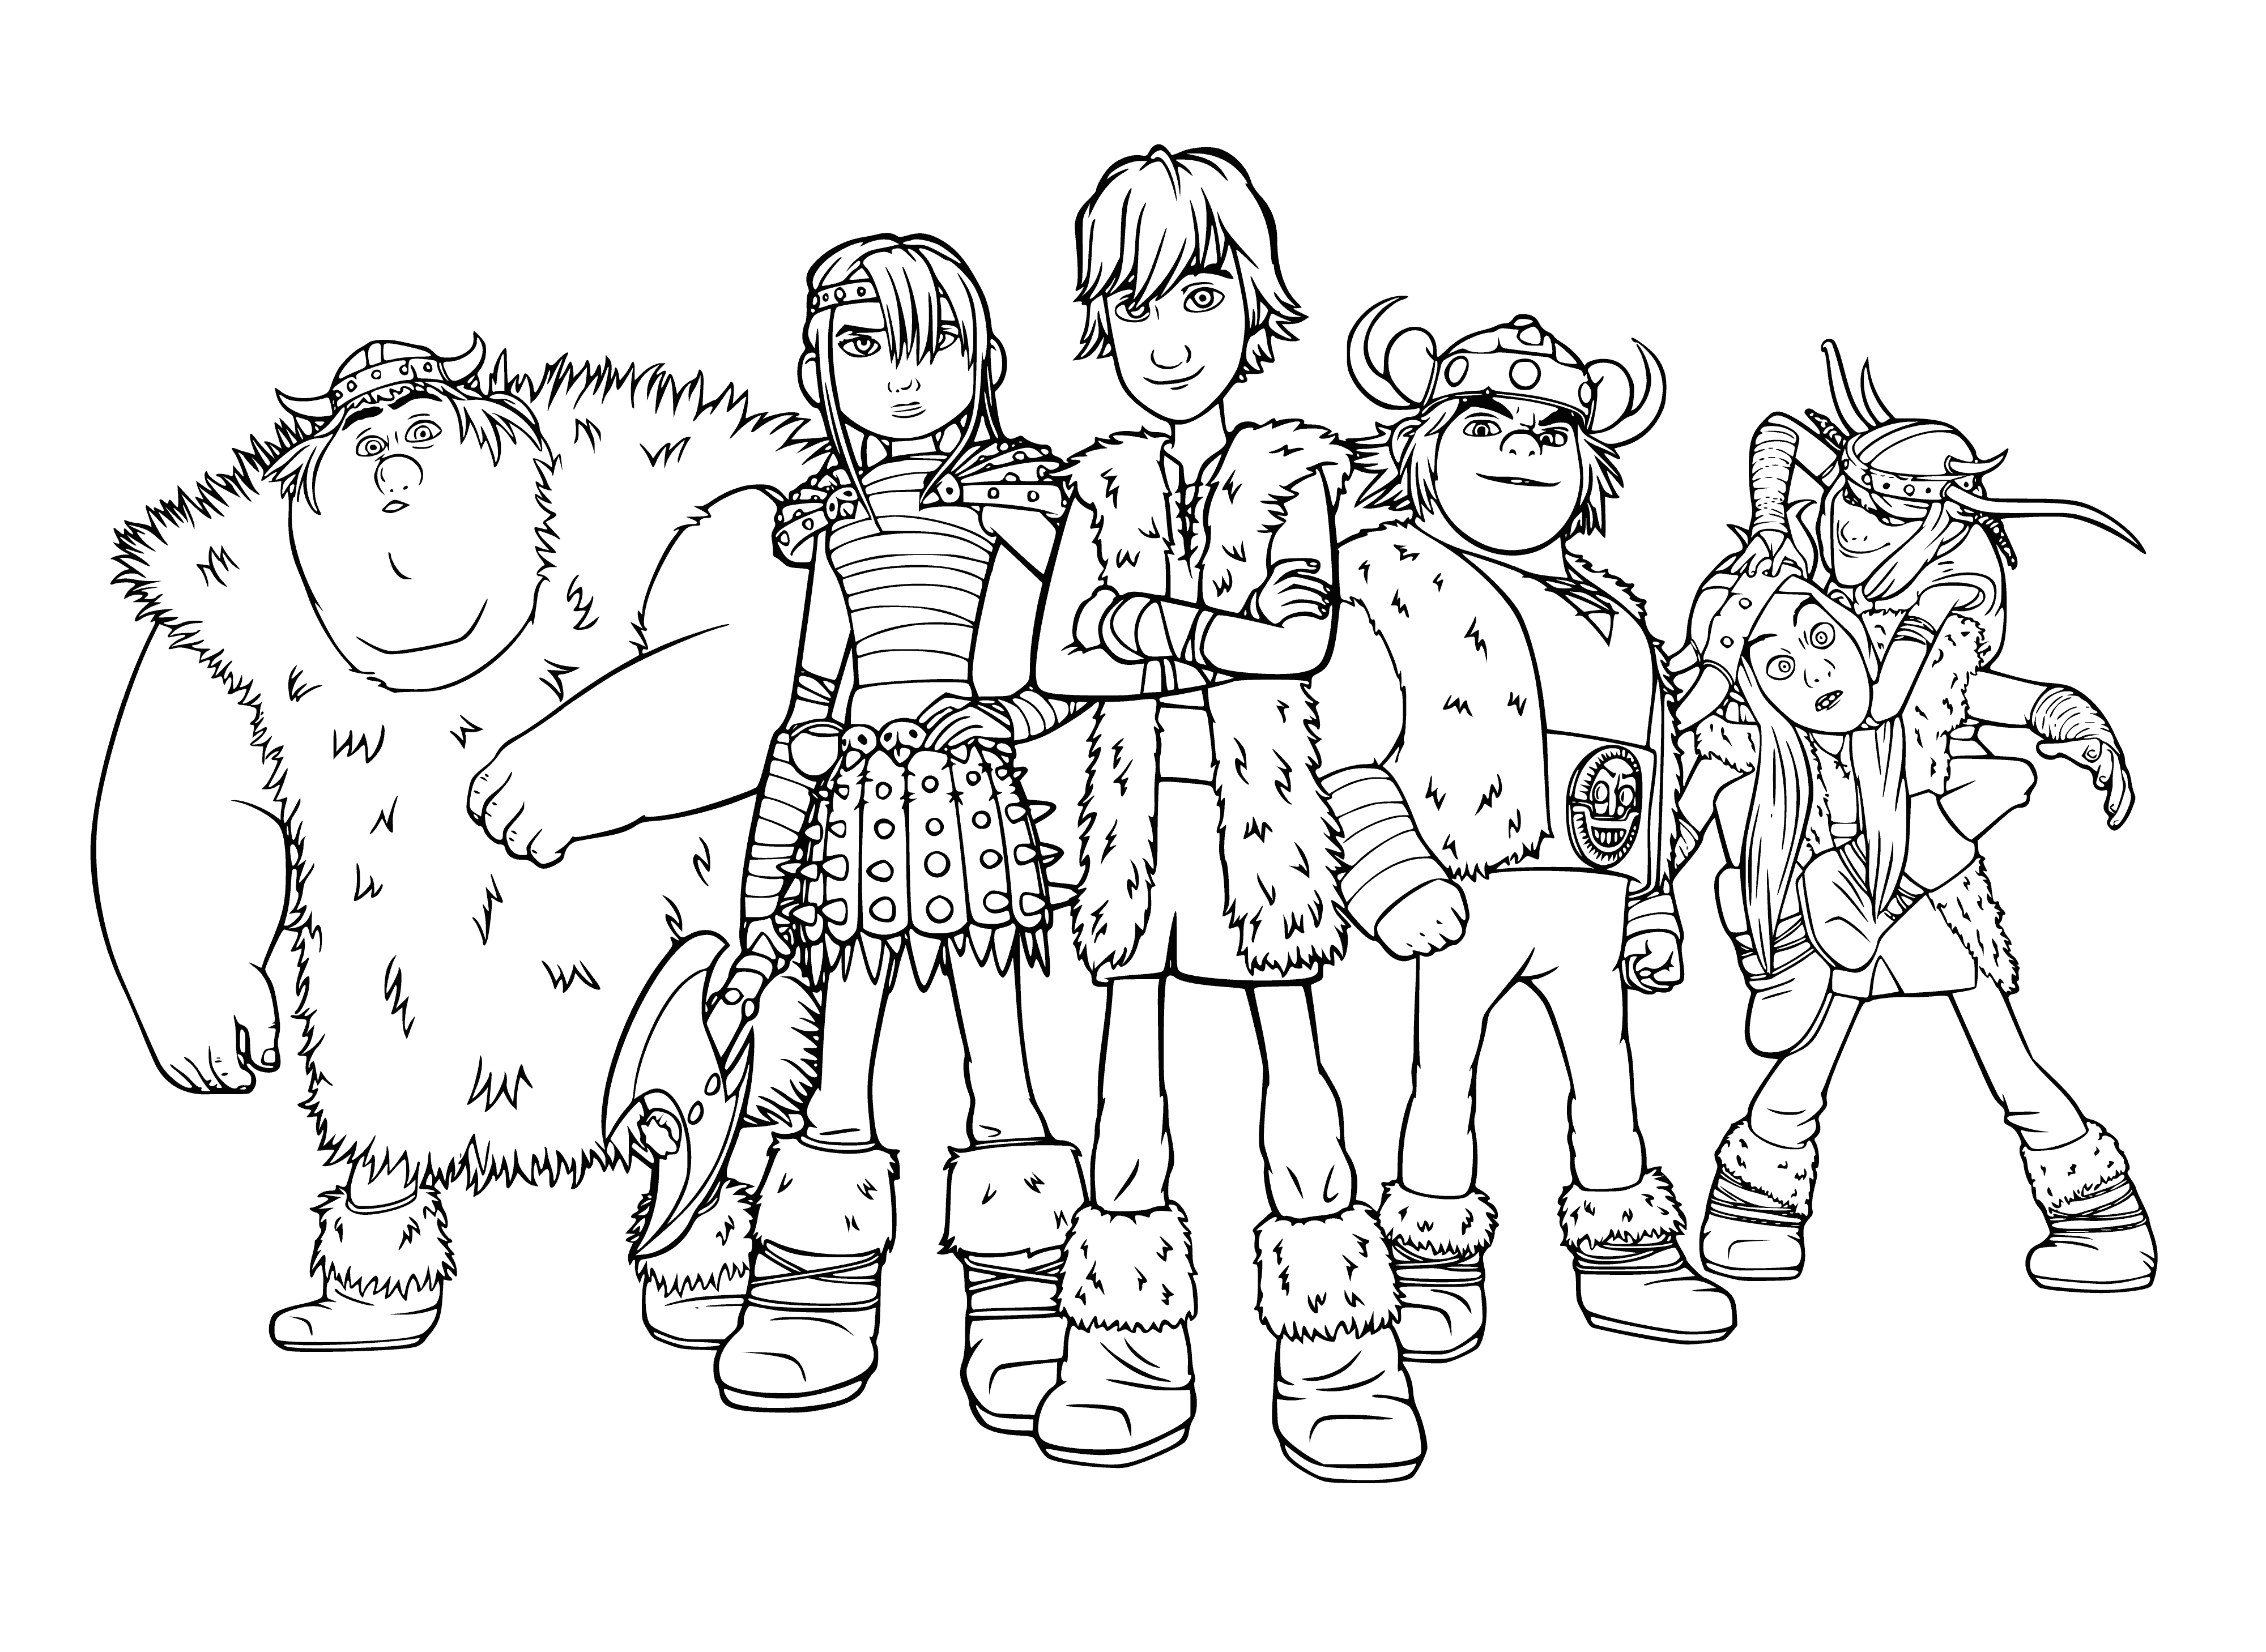 Hiccup's team coloring page